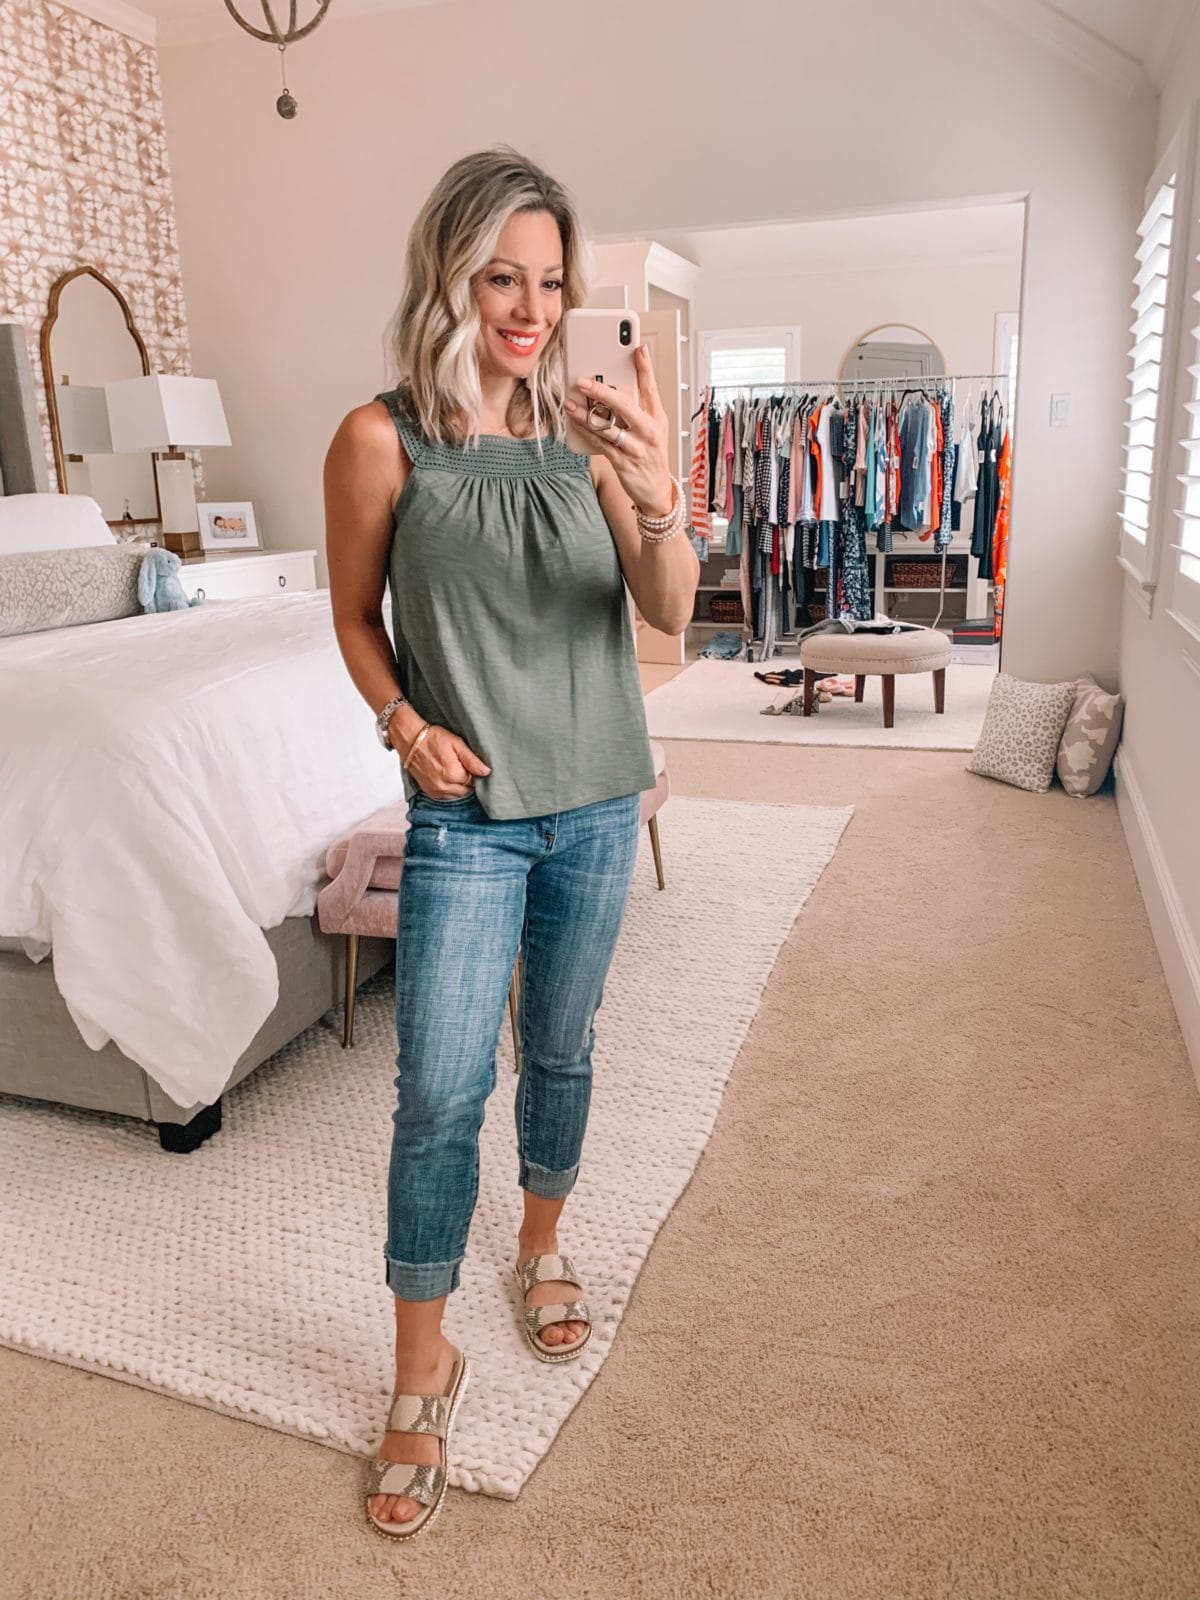 crochet top and jeans